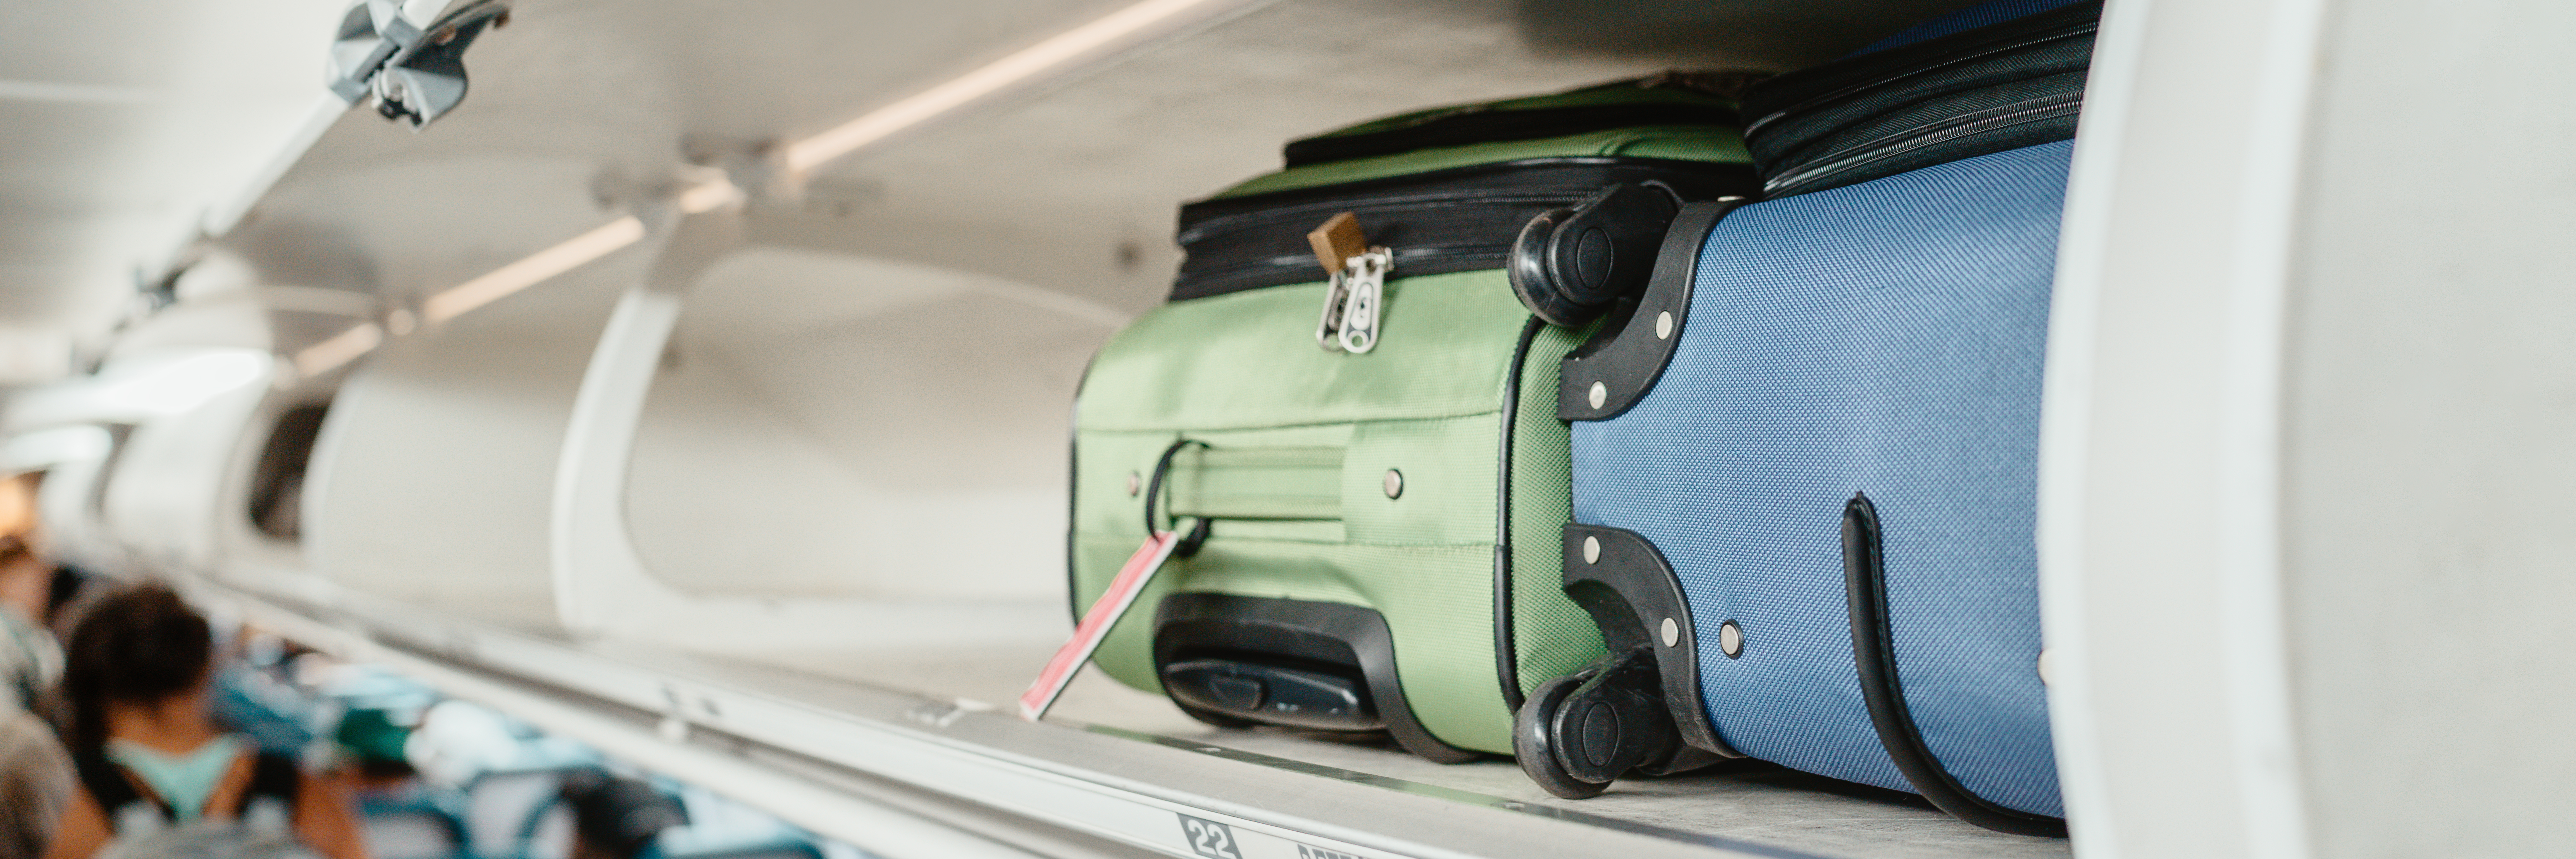 10 Underseat Carry-On Bags You Can Take on Any Flight